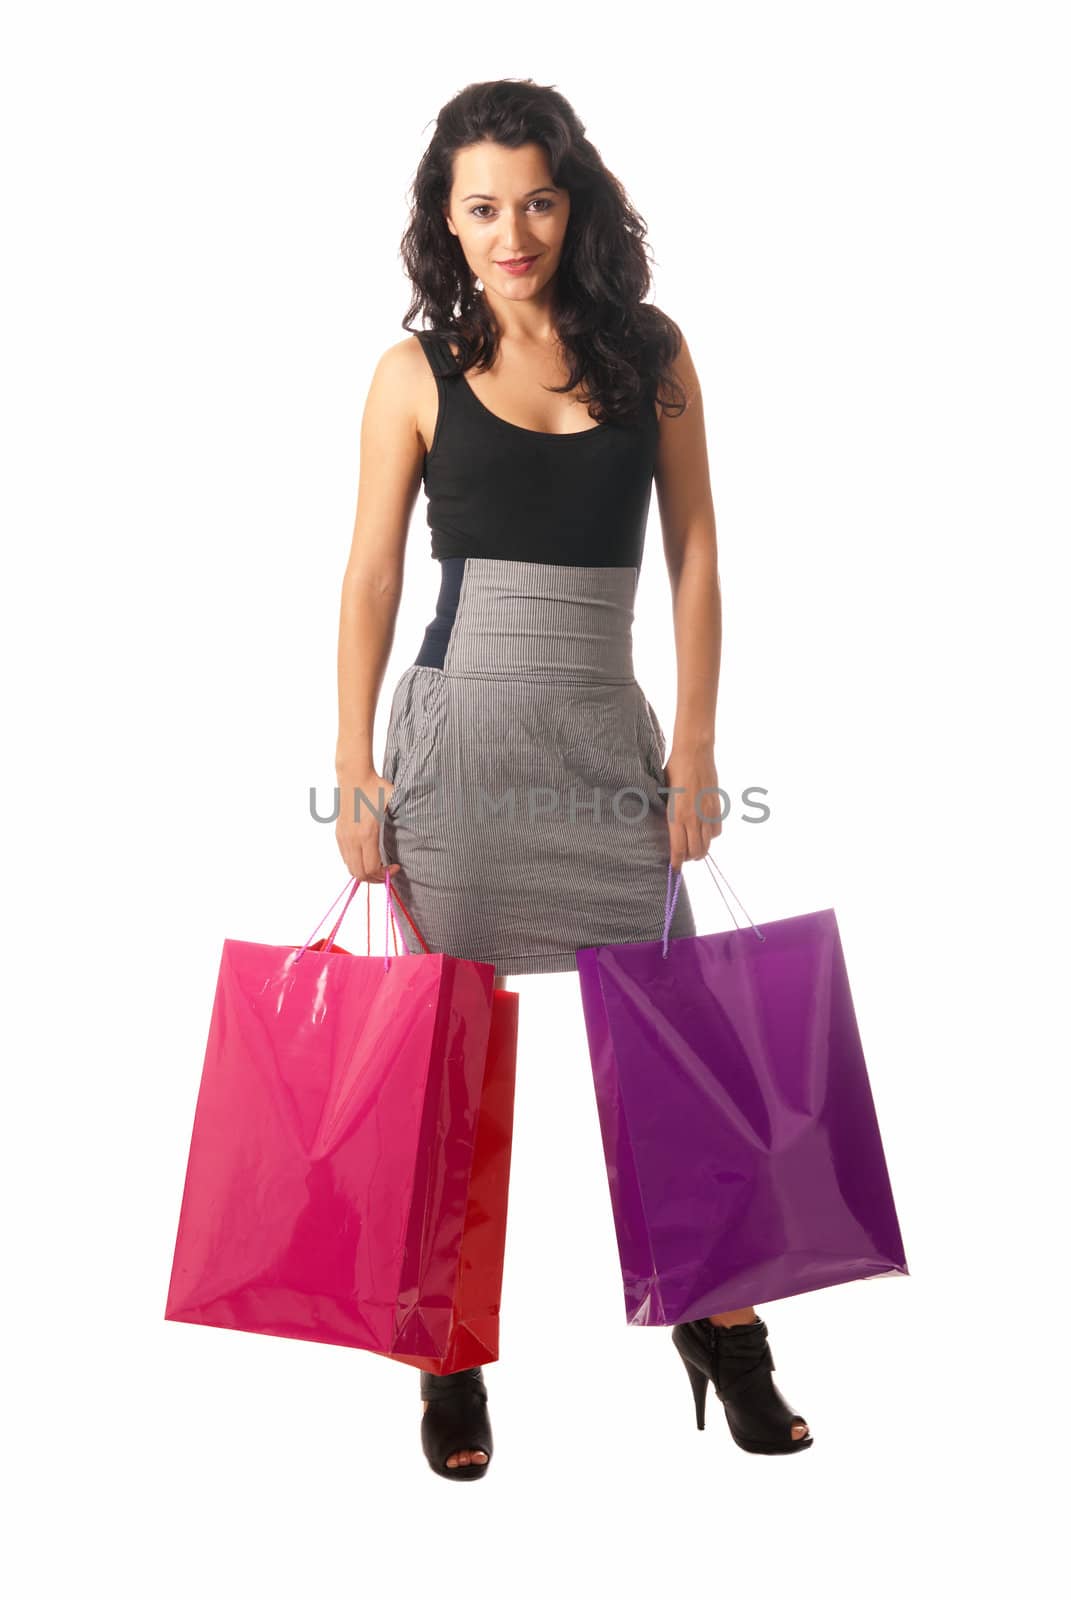 Young woman with shopping bags standing isolated on white background by dgmata